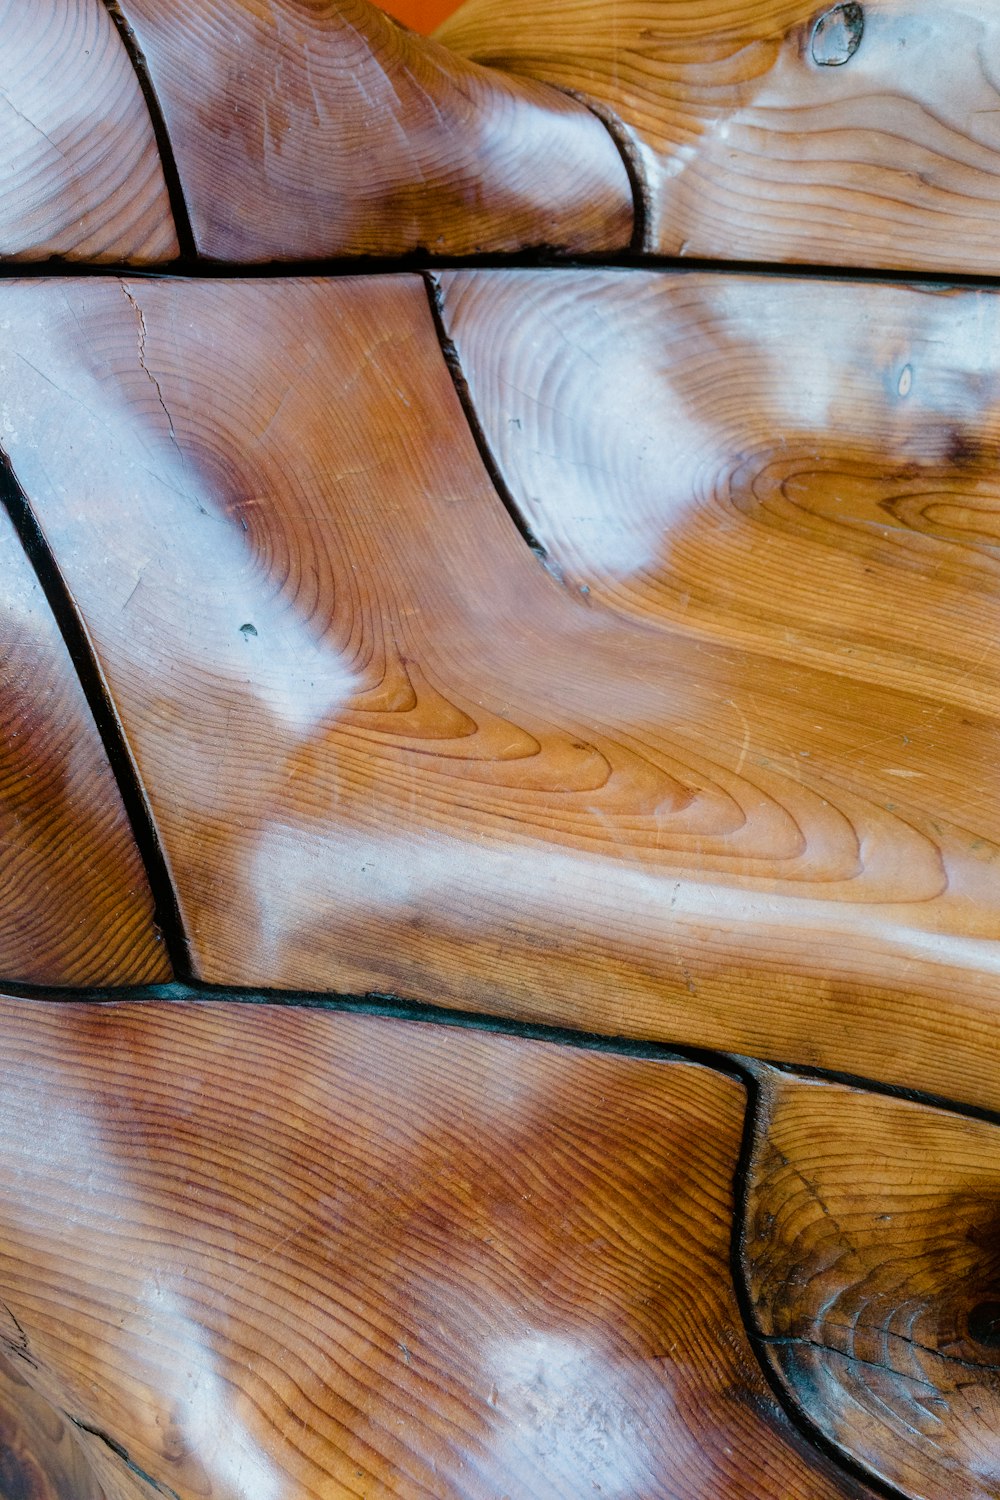 brown wooden plank in close up photography